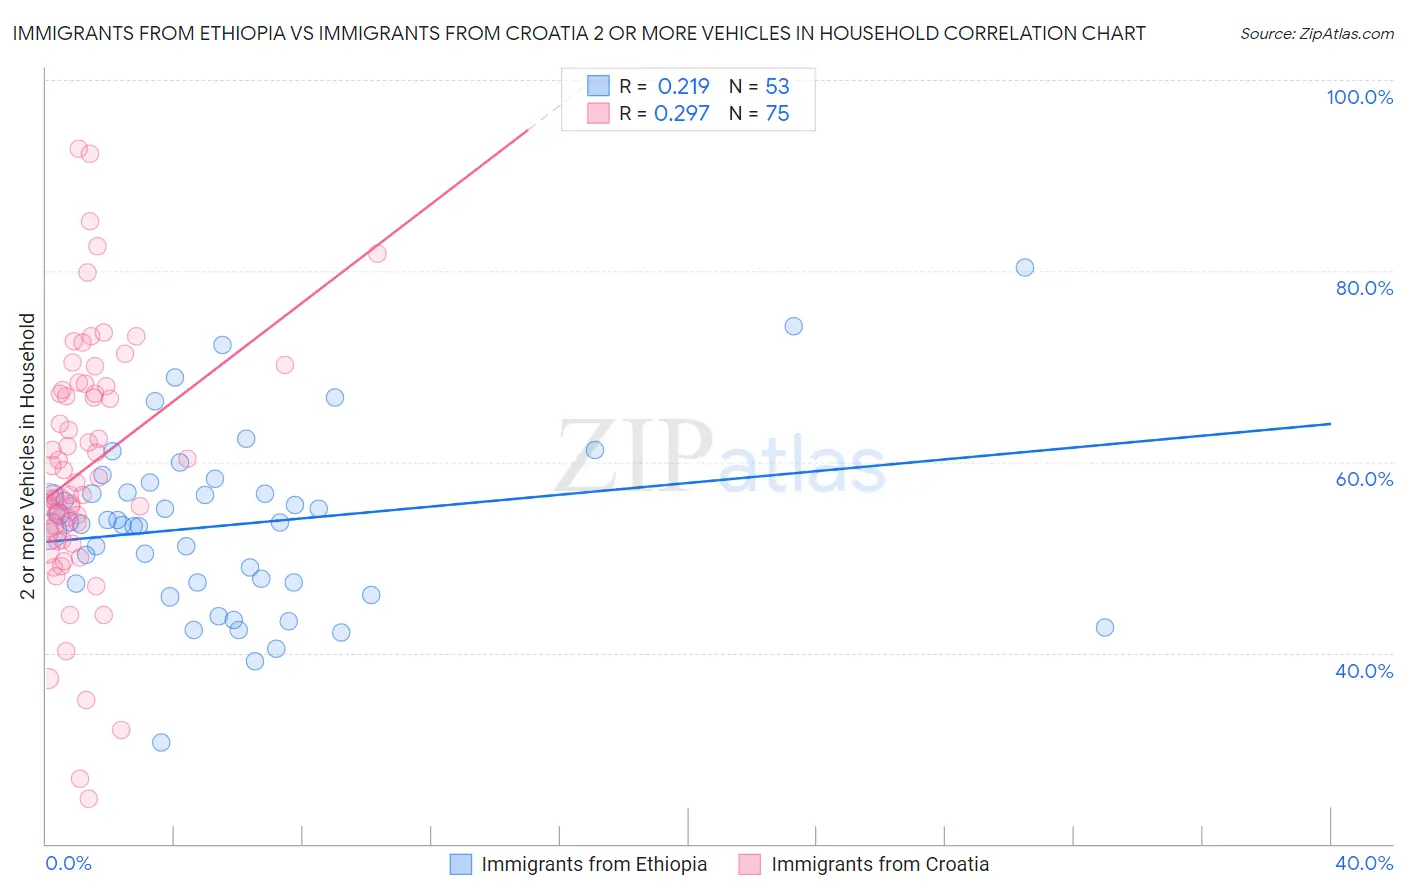 Immigrants from Ethiopia vs Immigrants from Croatia 2 or more Vehicles in Household